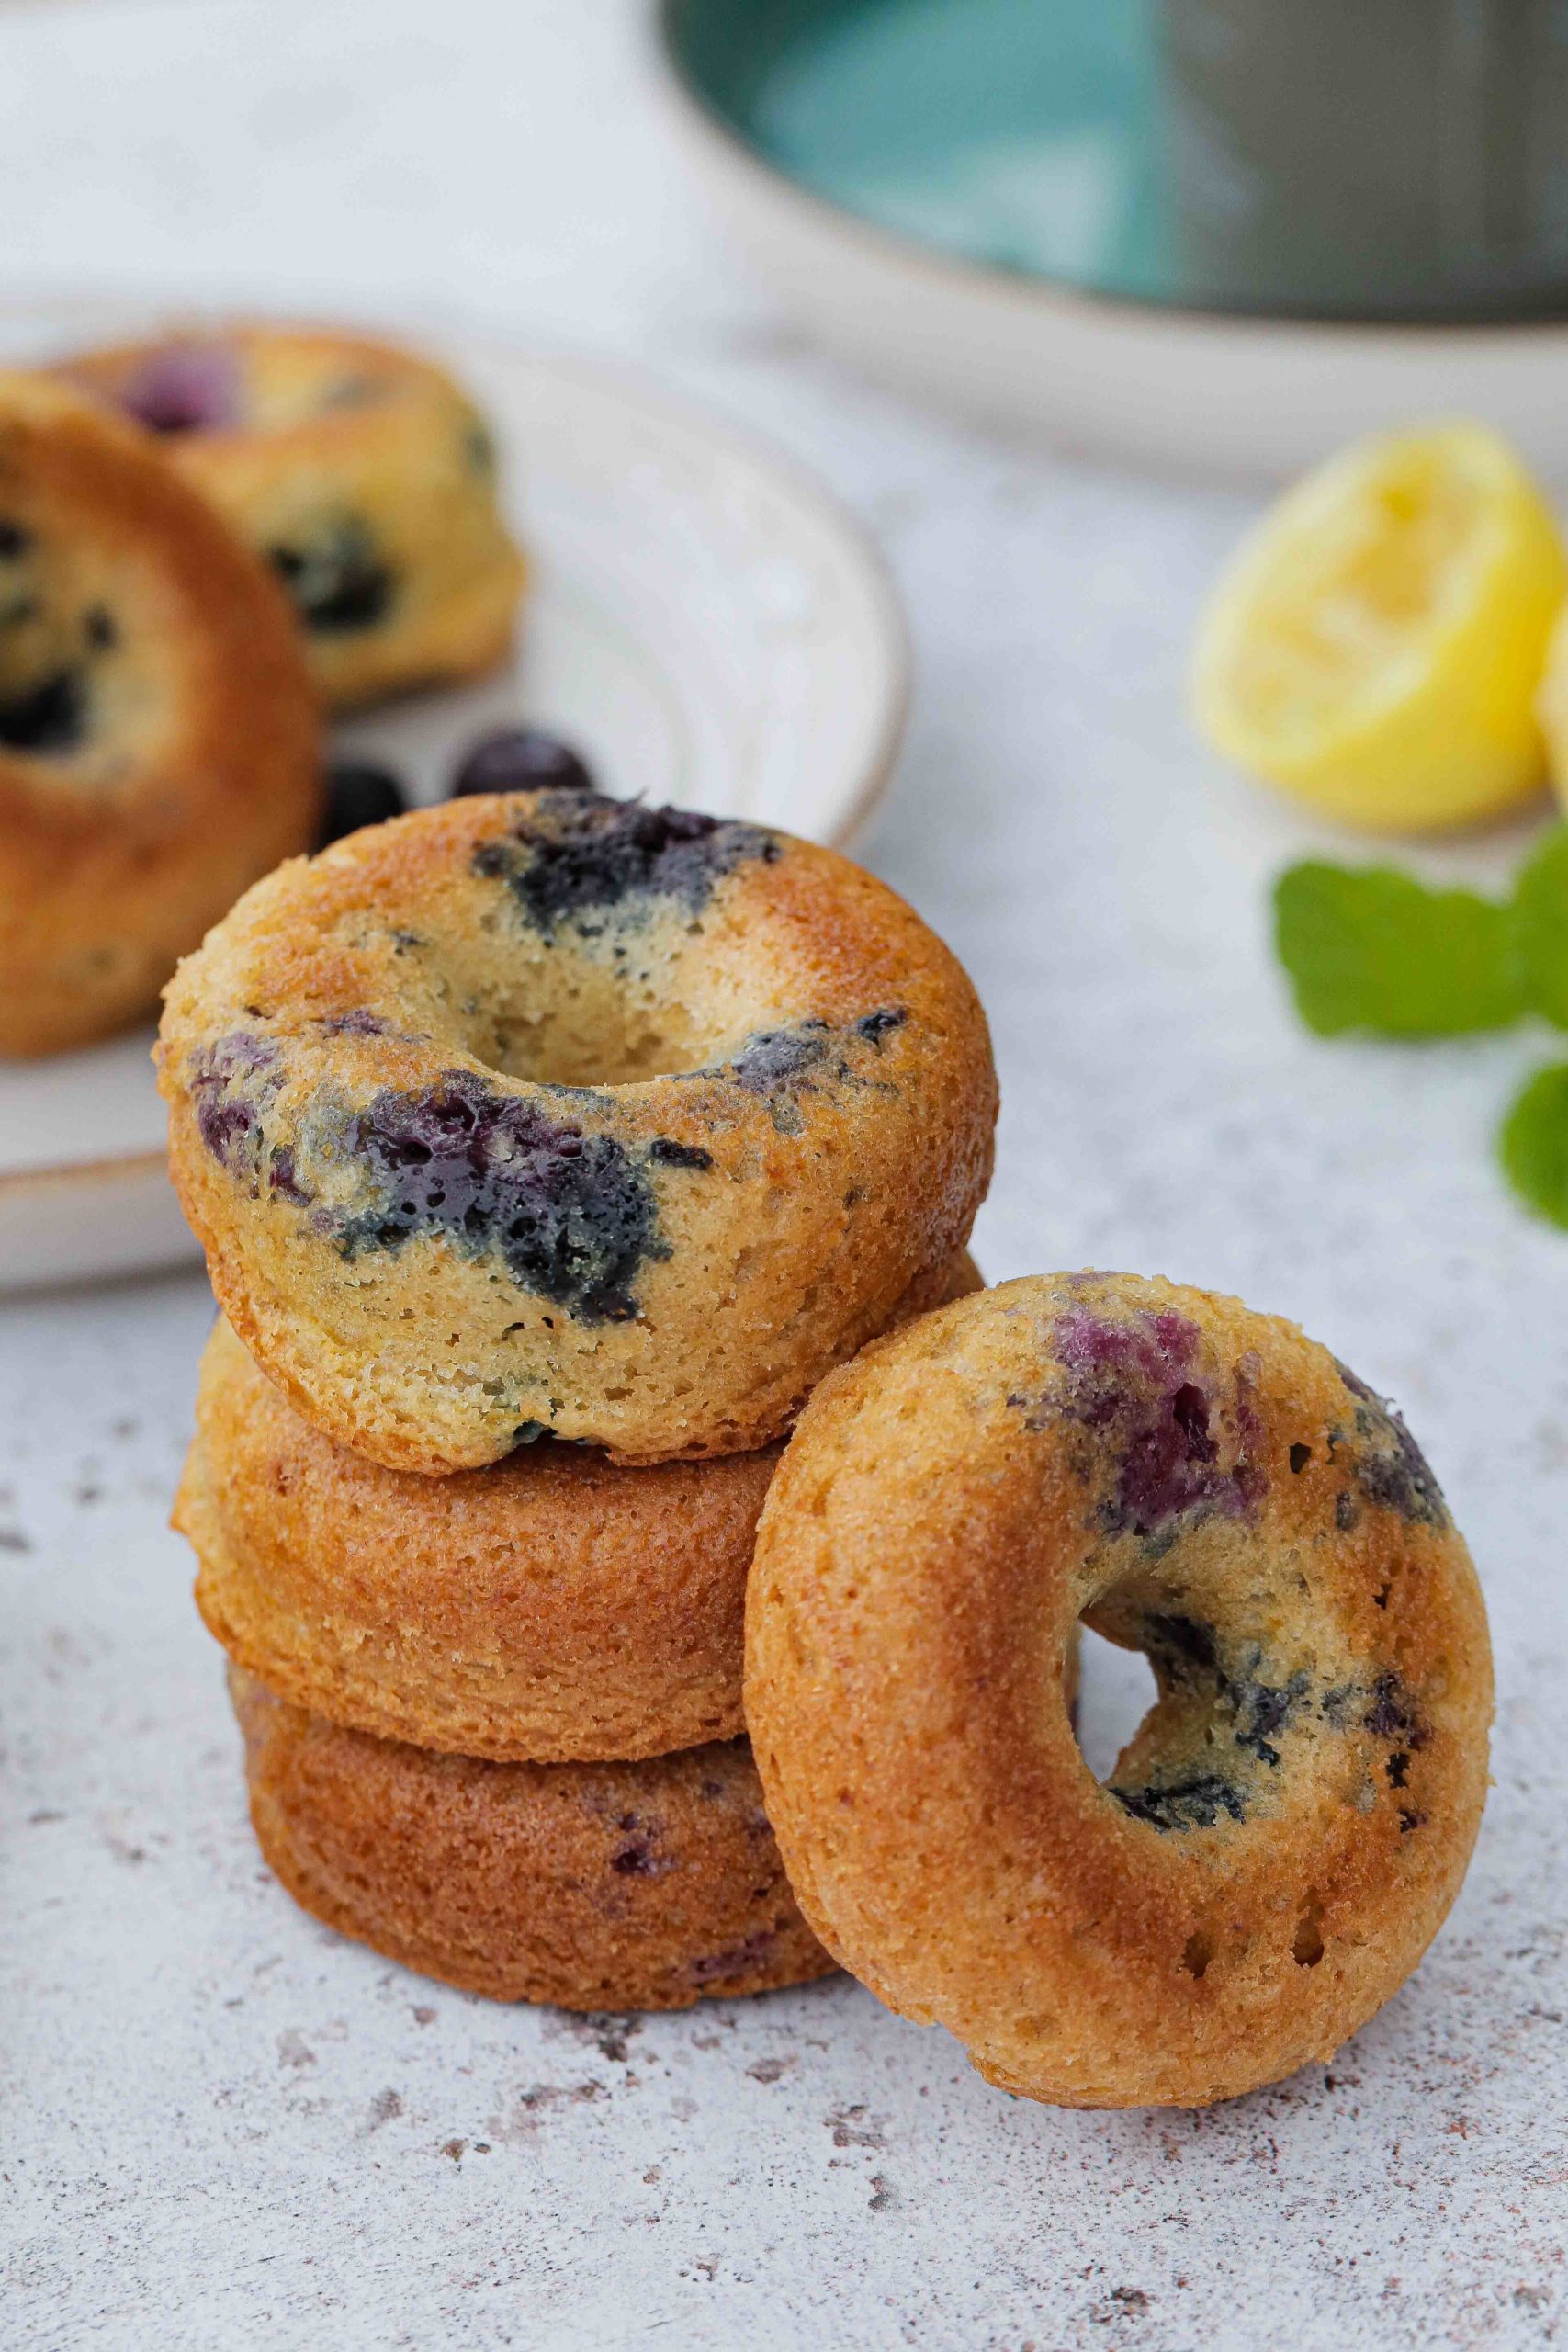 Lemon and Blueberry Baked Donuts